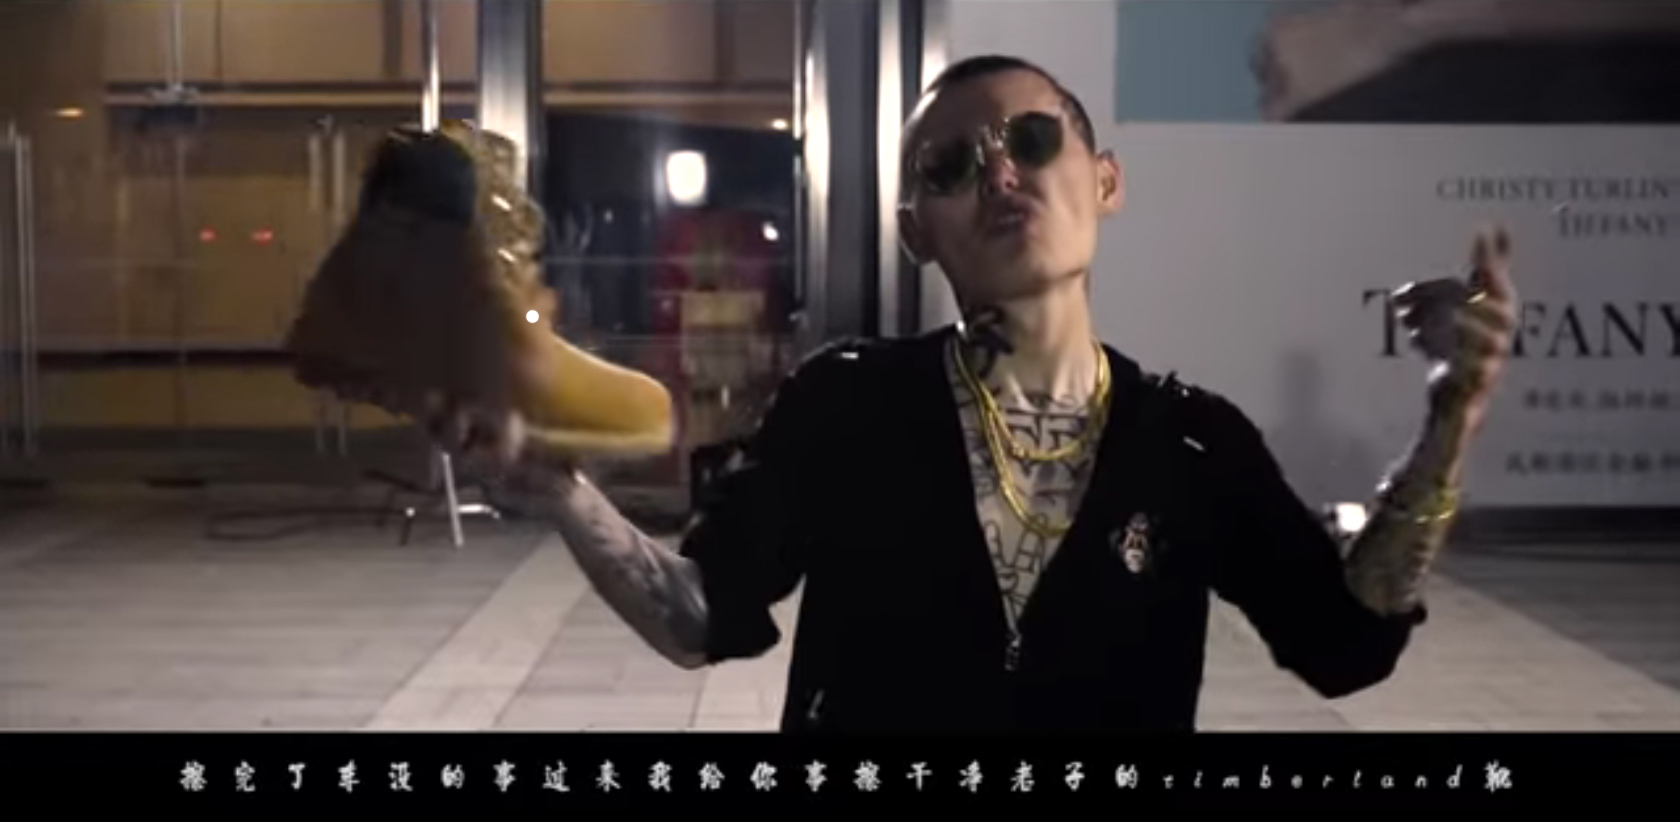 WATCH: Chinese Rapper Tells Foreigners to 'F*** Off' in Music Video